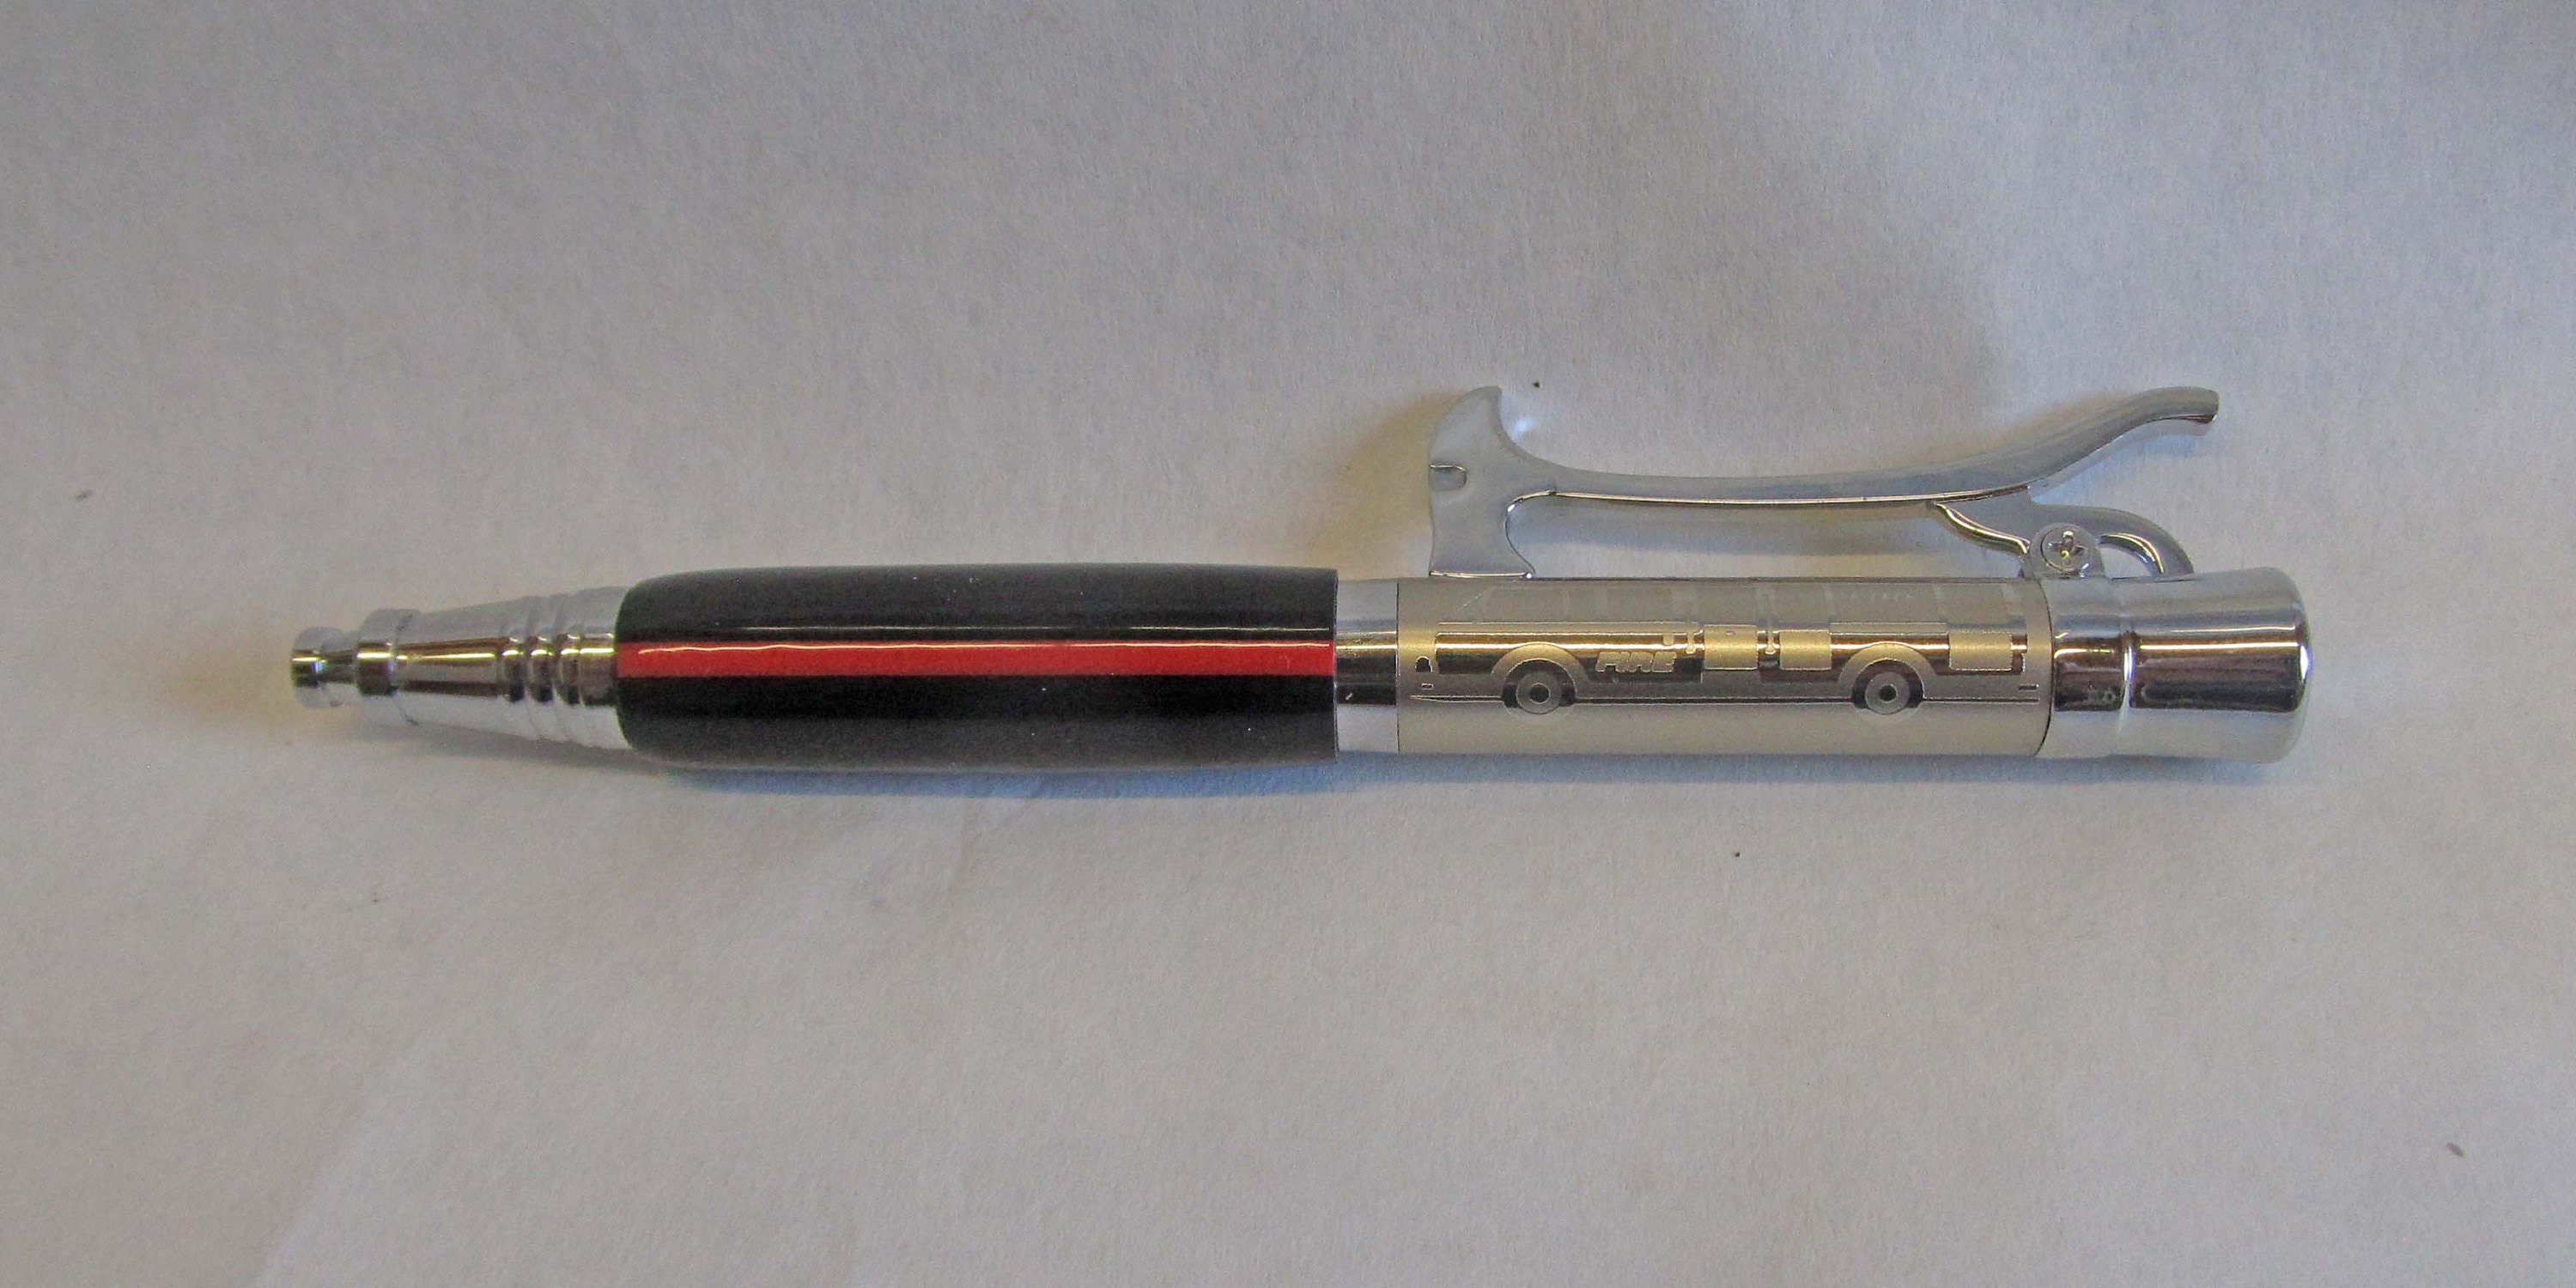 Firefighter Push and Lock Pen Kit in Chrome at Penn State Industries